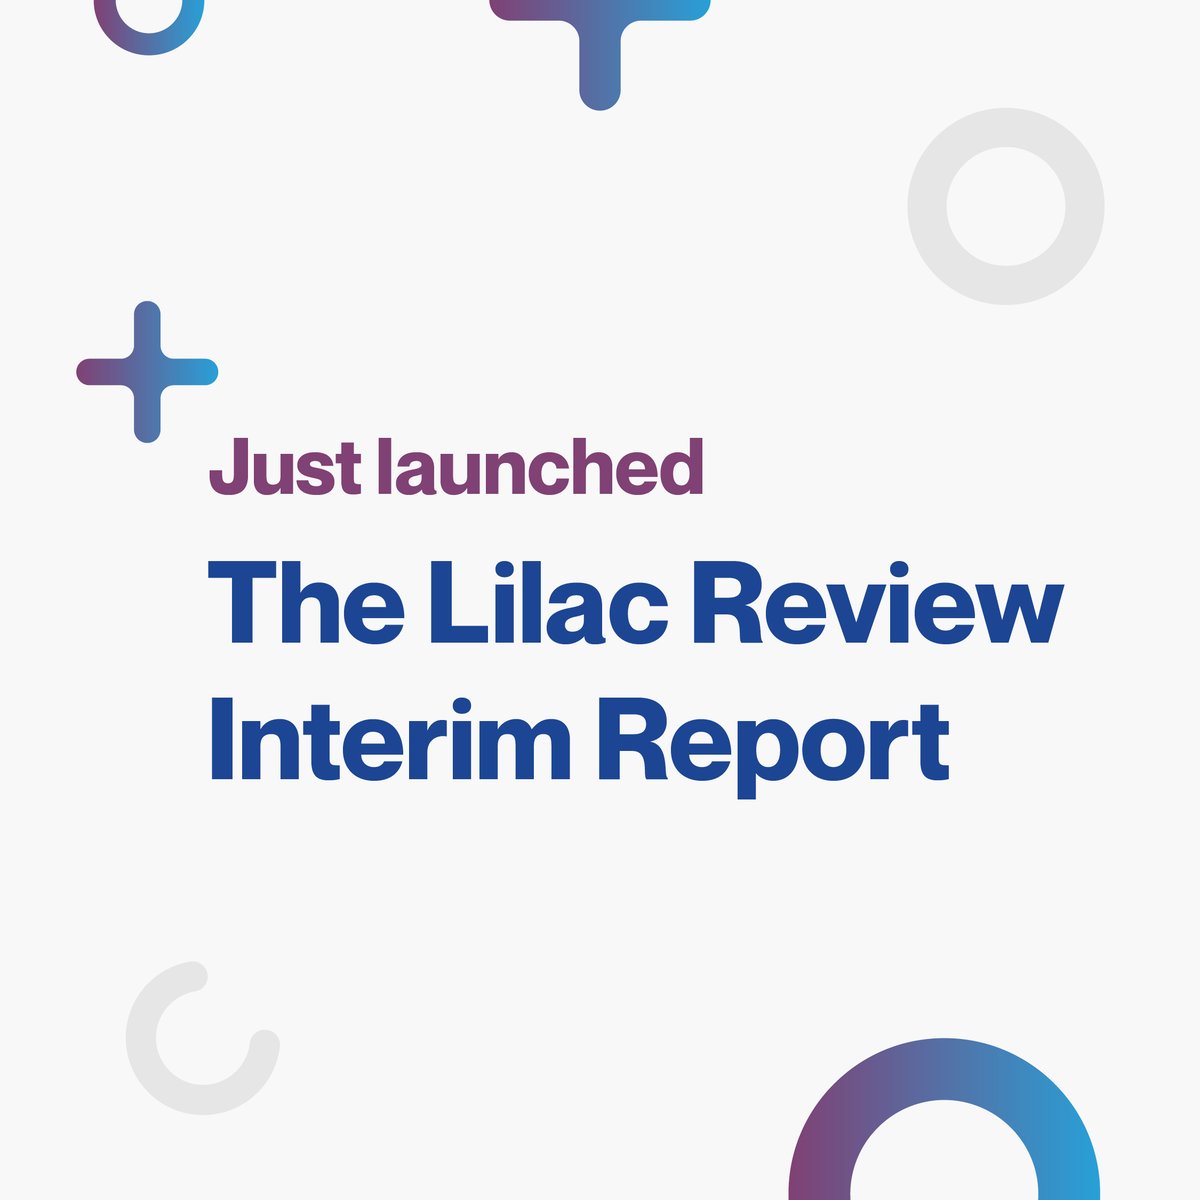 The Lilac Review Interim report launches today! The report details the unique challenges faced by Disabled entrepreneurs in the UK and offers recommendations on how to tackle them. Access the report here: ow.ly/3RP050RGNVt